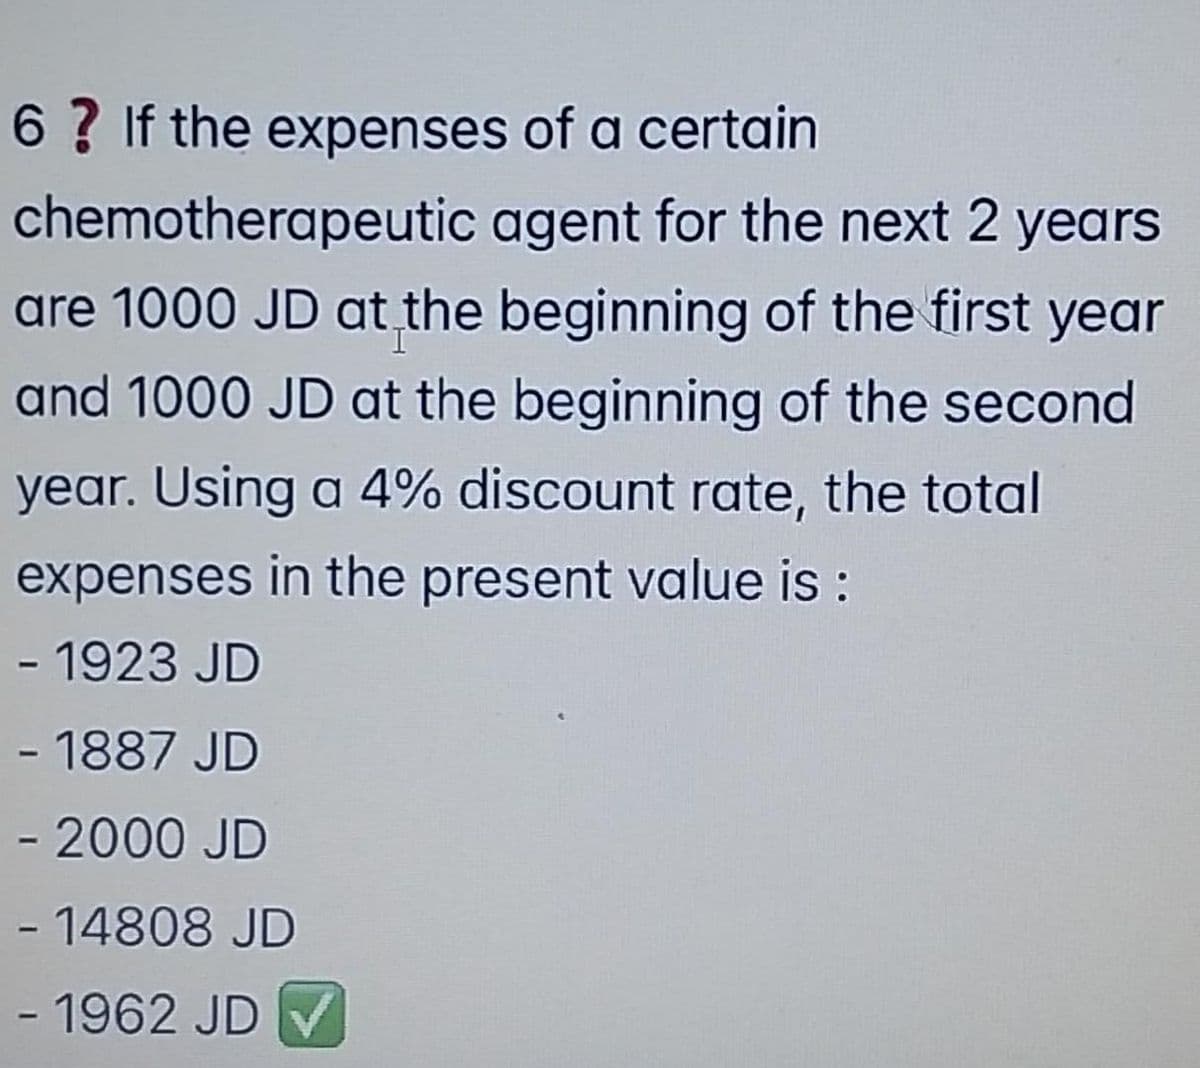 6 ? If the expenses of a certain
chemotherapeutic agent for the next 2 years
are 1000 JD at the beginning of the first year
and 1000 JD at the beginning of the second
year. Using a 4% discount rate, the total
expenses in the present value is :
- 1923 JD
- 1887 JD
- 2000 JD
- 14808 JD
- 1962 JD V
